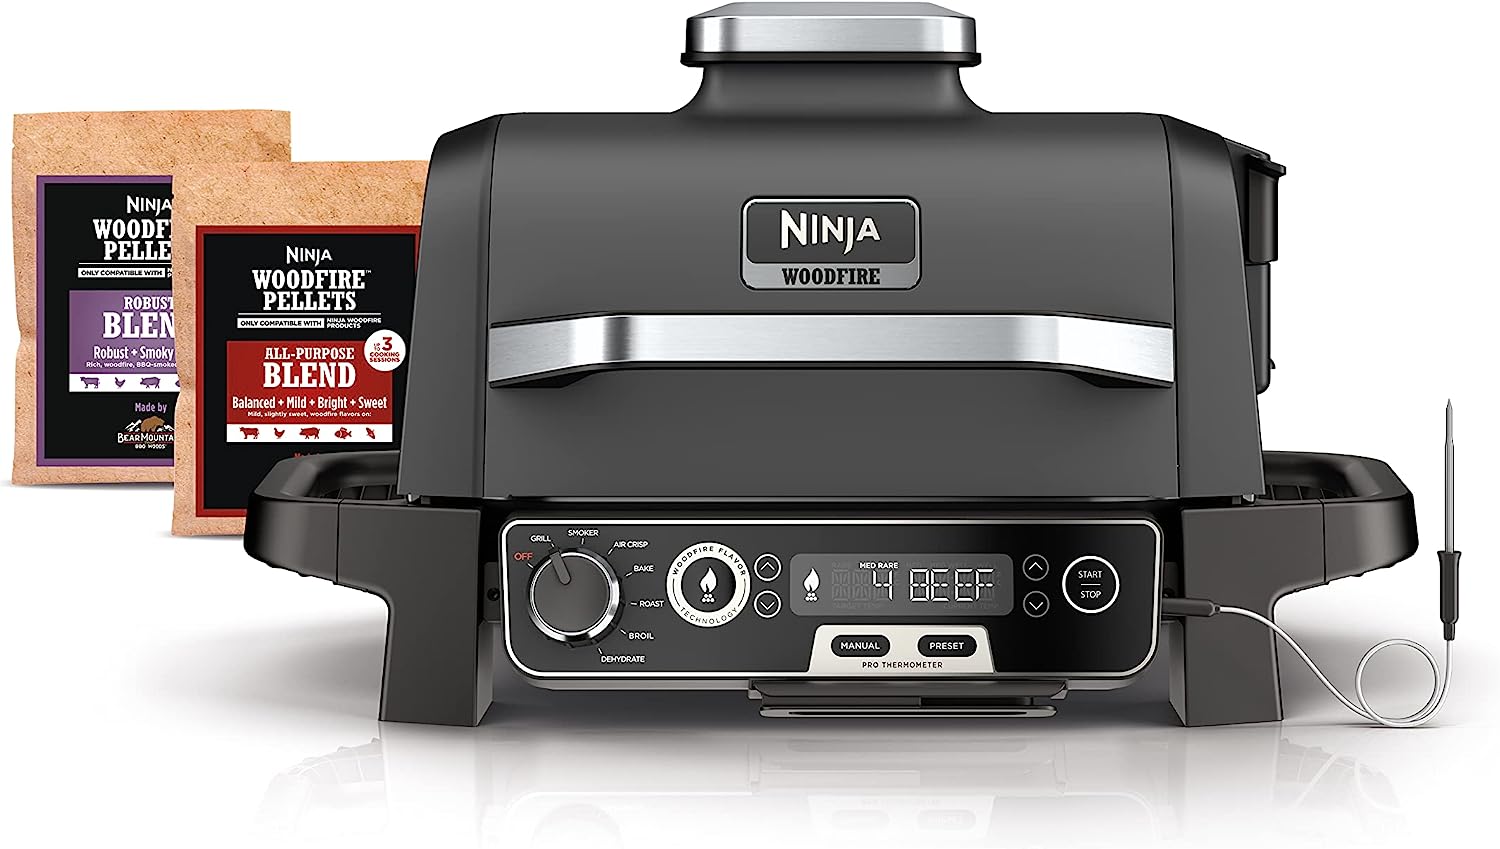 Best Seller : The Ninja OG701 Woodfire Outdoor Grill & Smoker Review